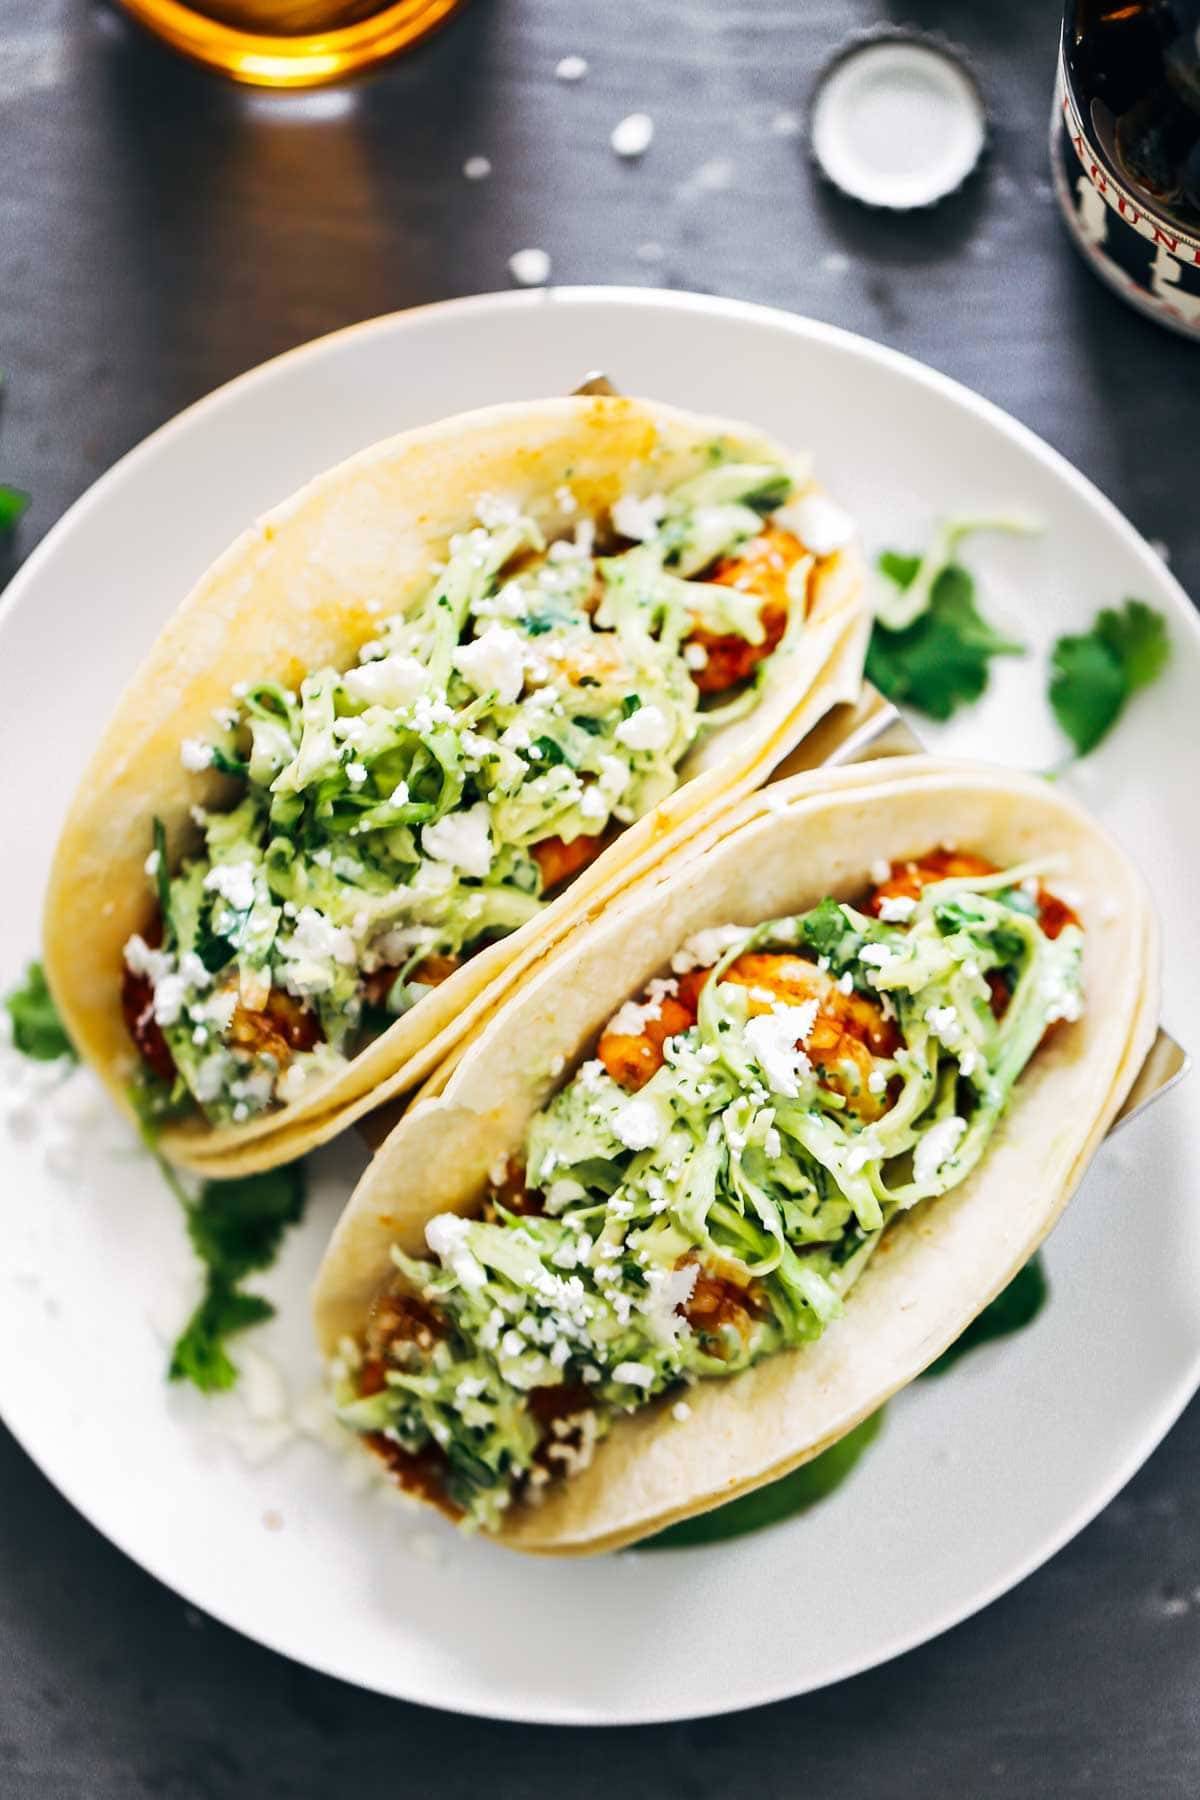 Images of TACOS - JapaneseClass.jp